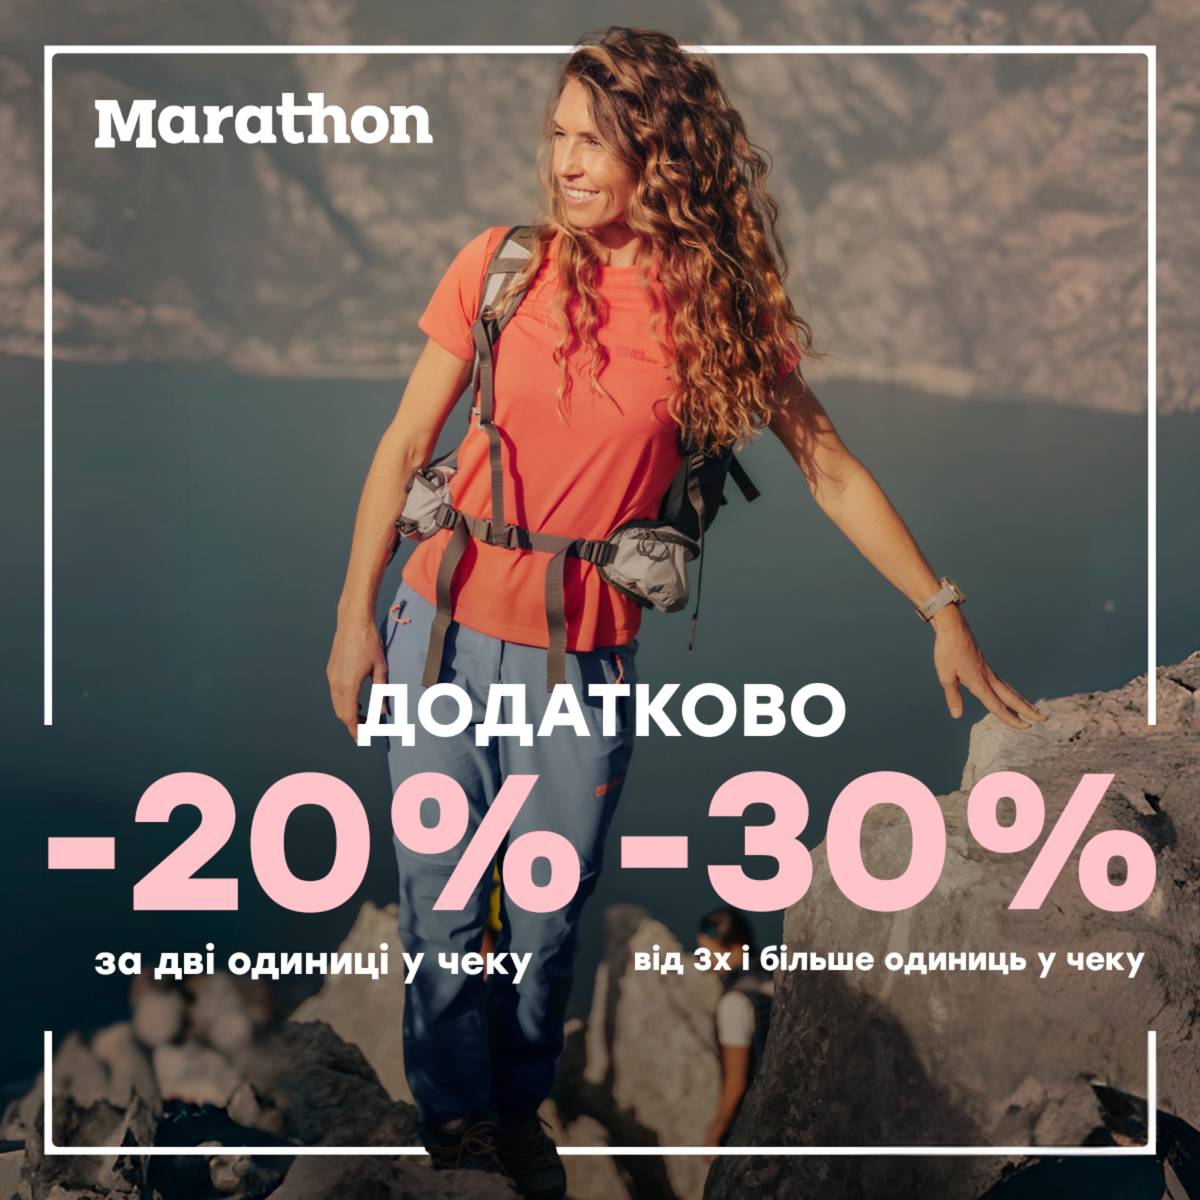 Additional -20% or -30%